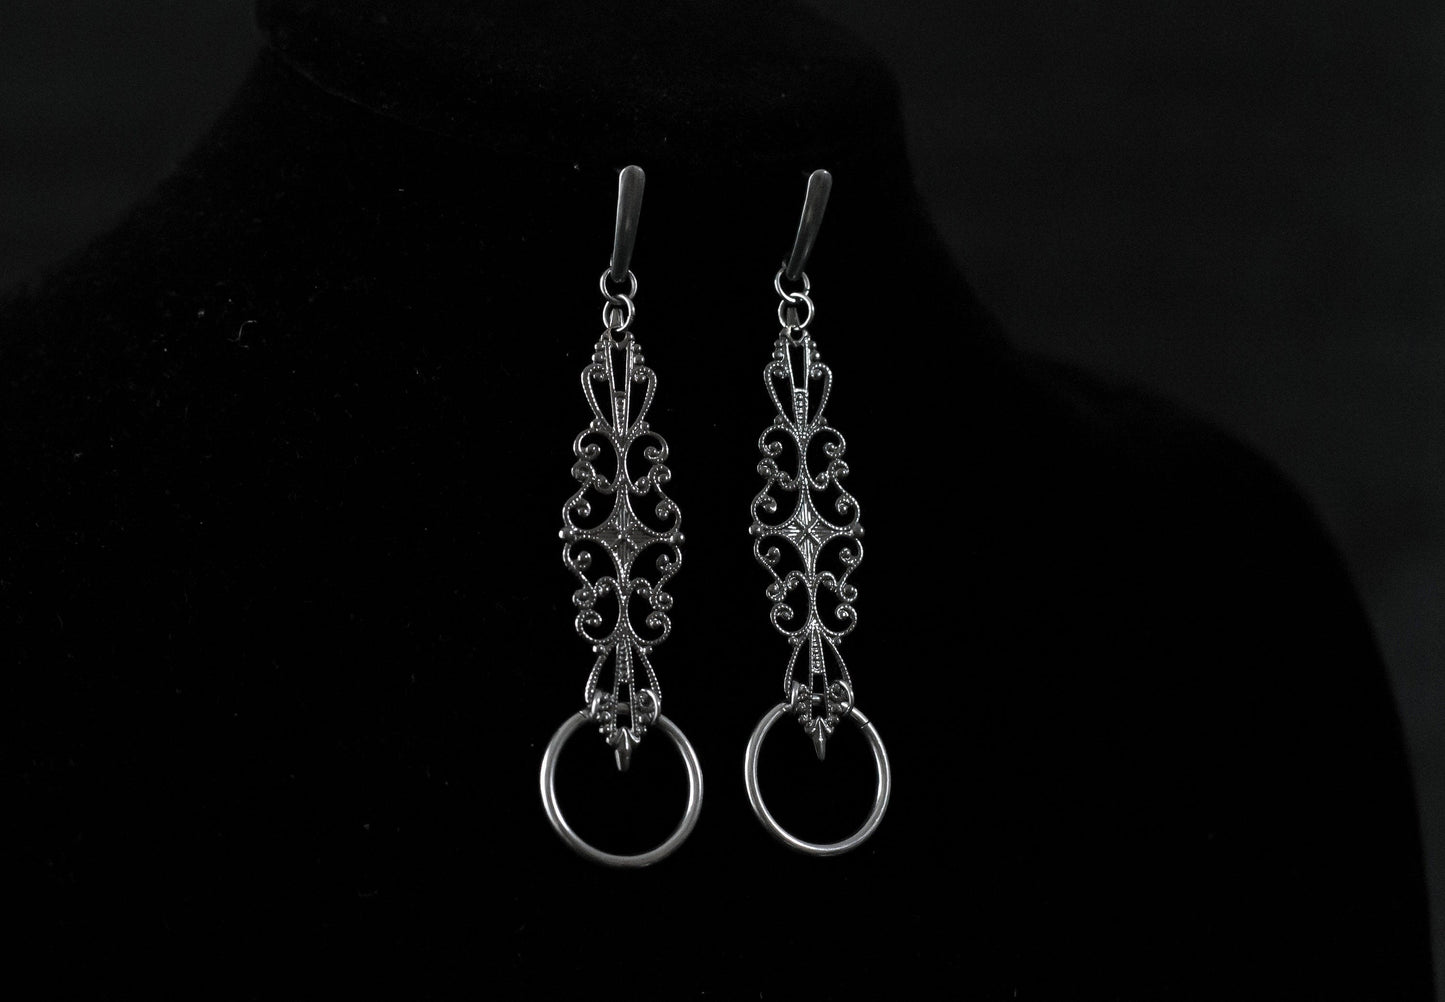 Elegant filigree earrings with O-ring detail from Myril Jewels, reflecting neo-gothic charm for a bold, gothic-chic style statement, perfect for any avant-garde ensemble